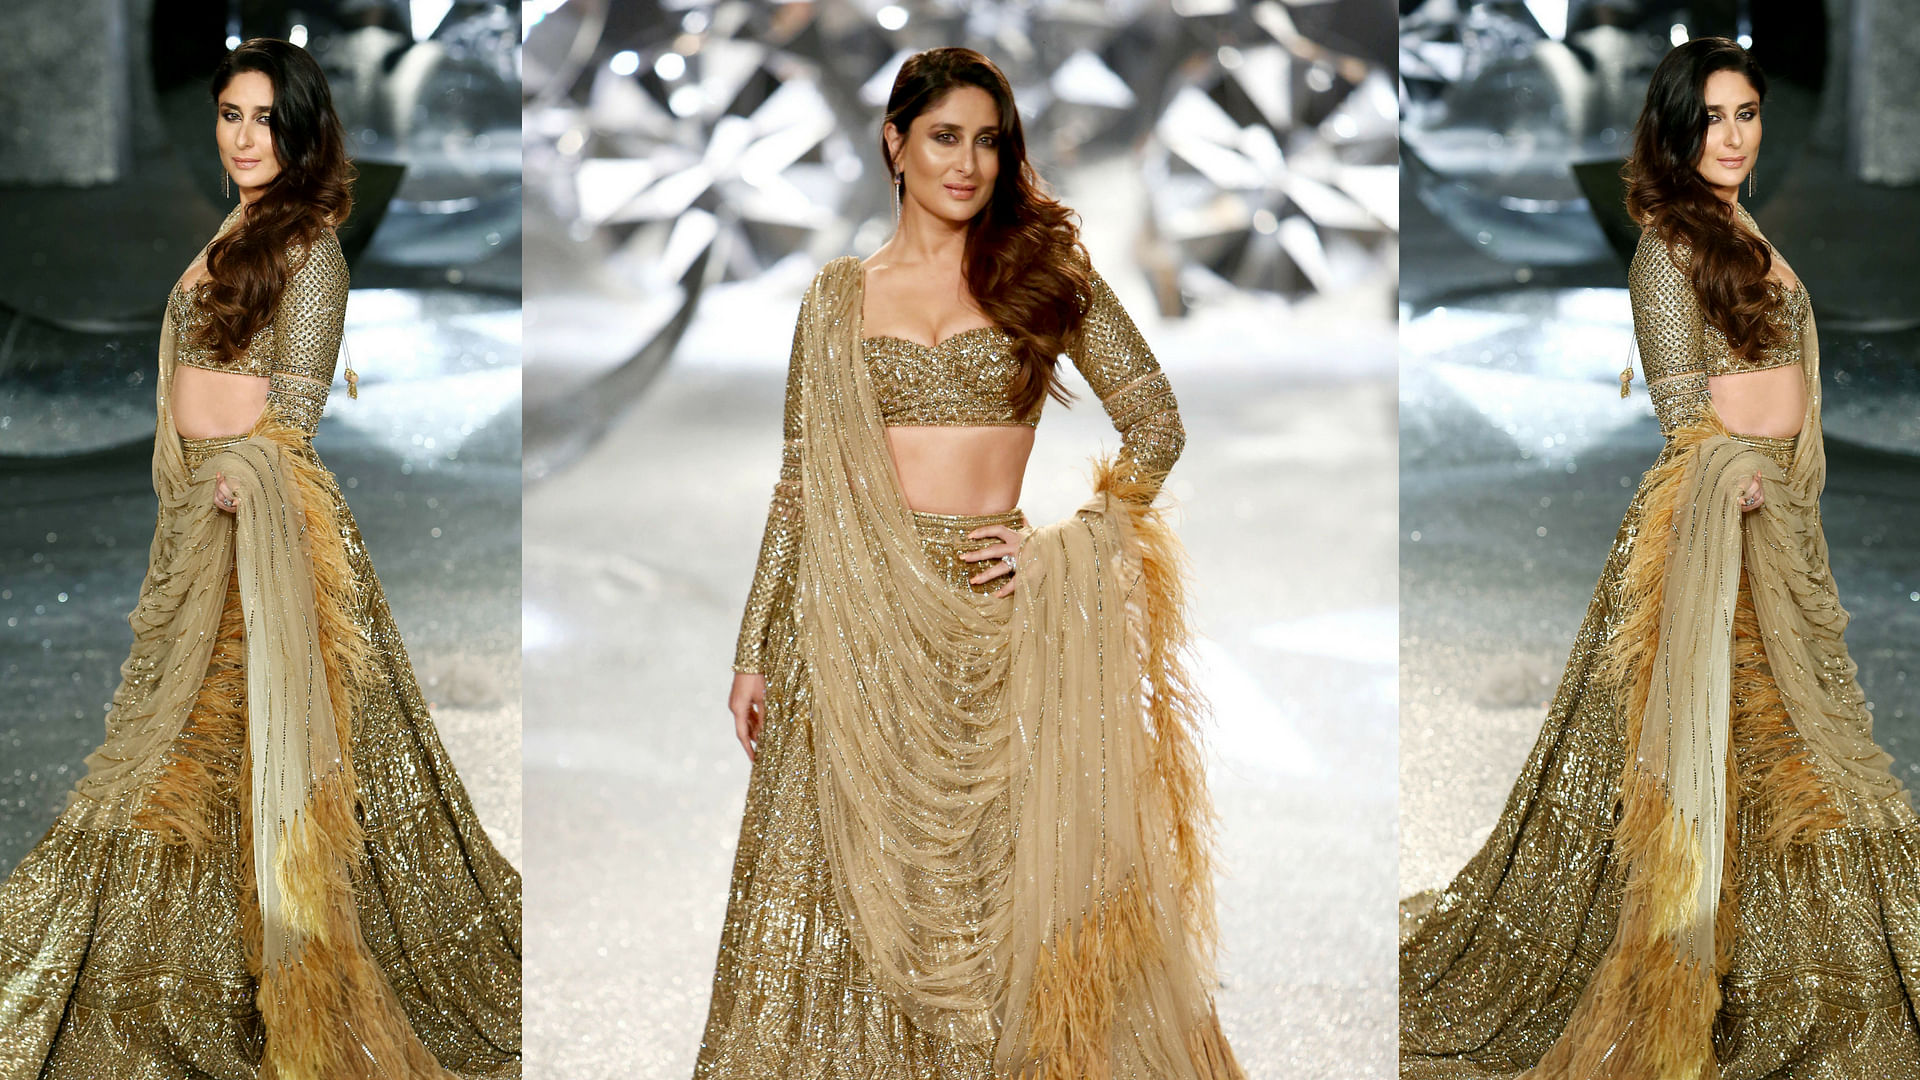 Kareena Kapoor Khan Looks Ethereal In A Shimmery Silver Lehenga At Alia  Bhatt & Ranbir Kapoor's Mehendi, Netizens React, “Only Product Of Nepotism  Who Is Talented”